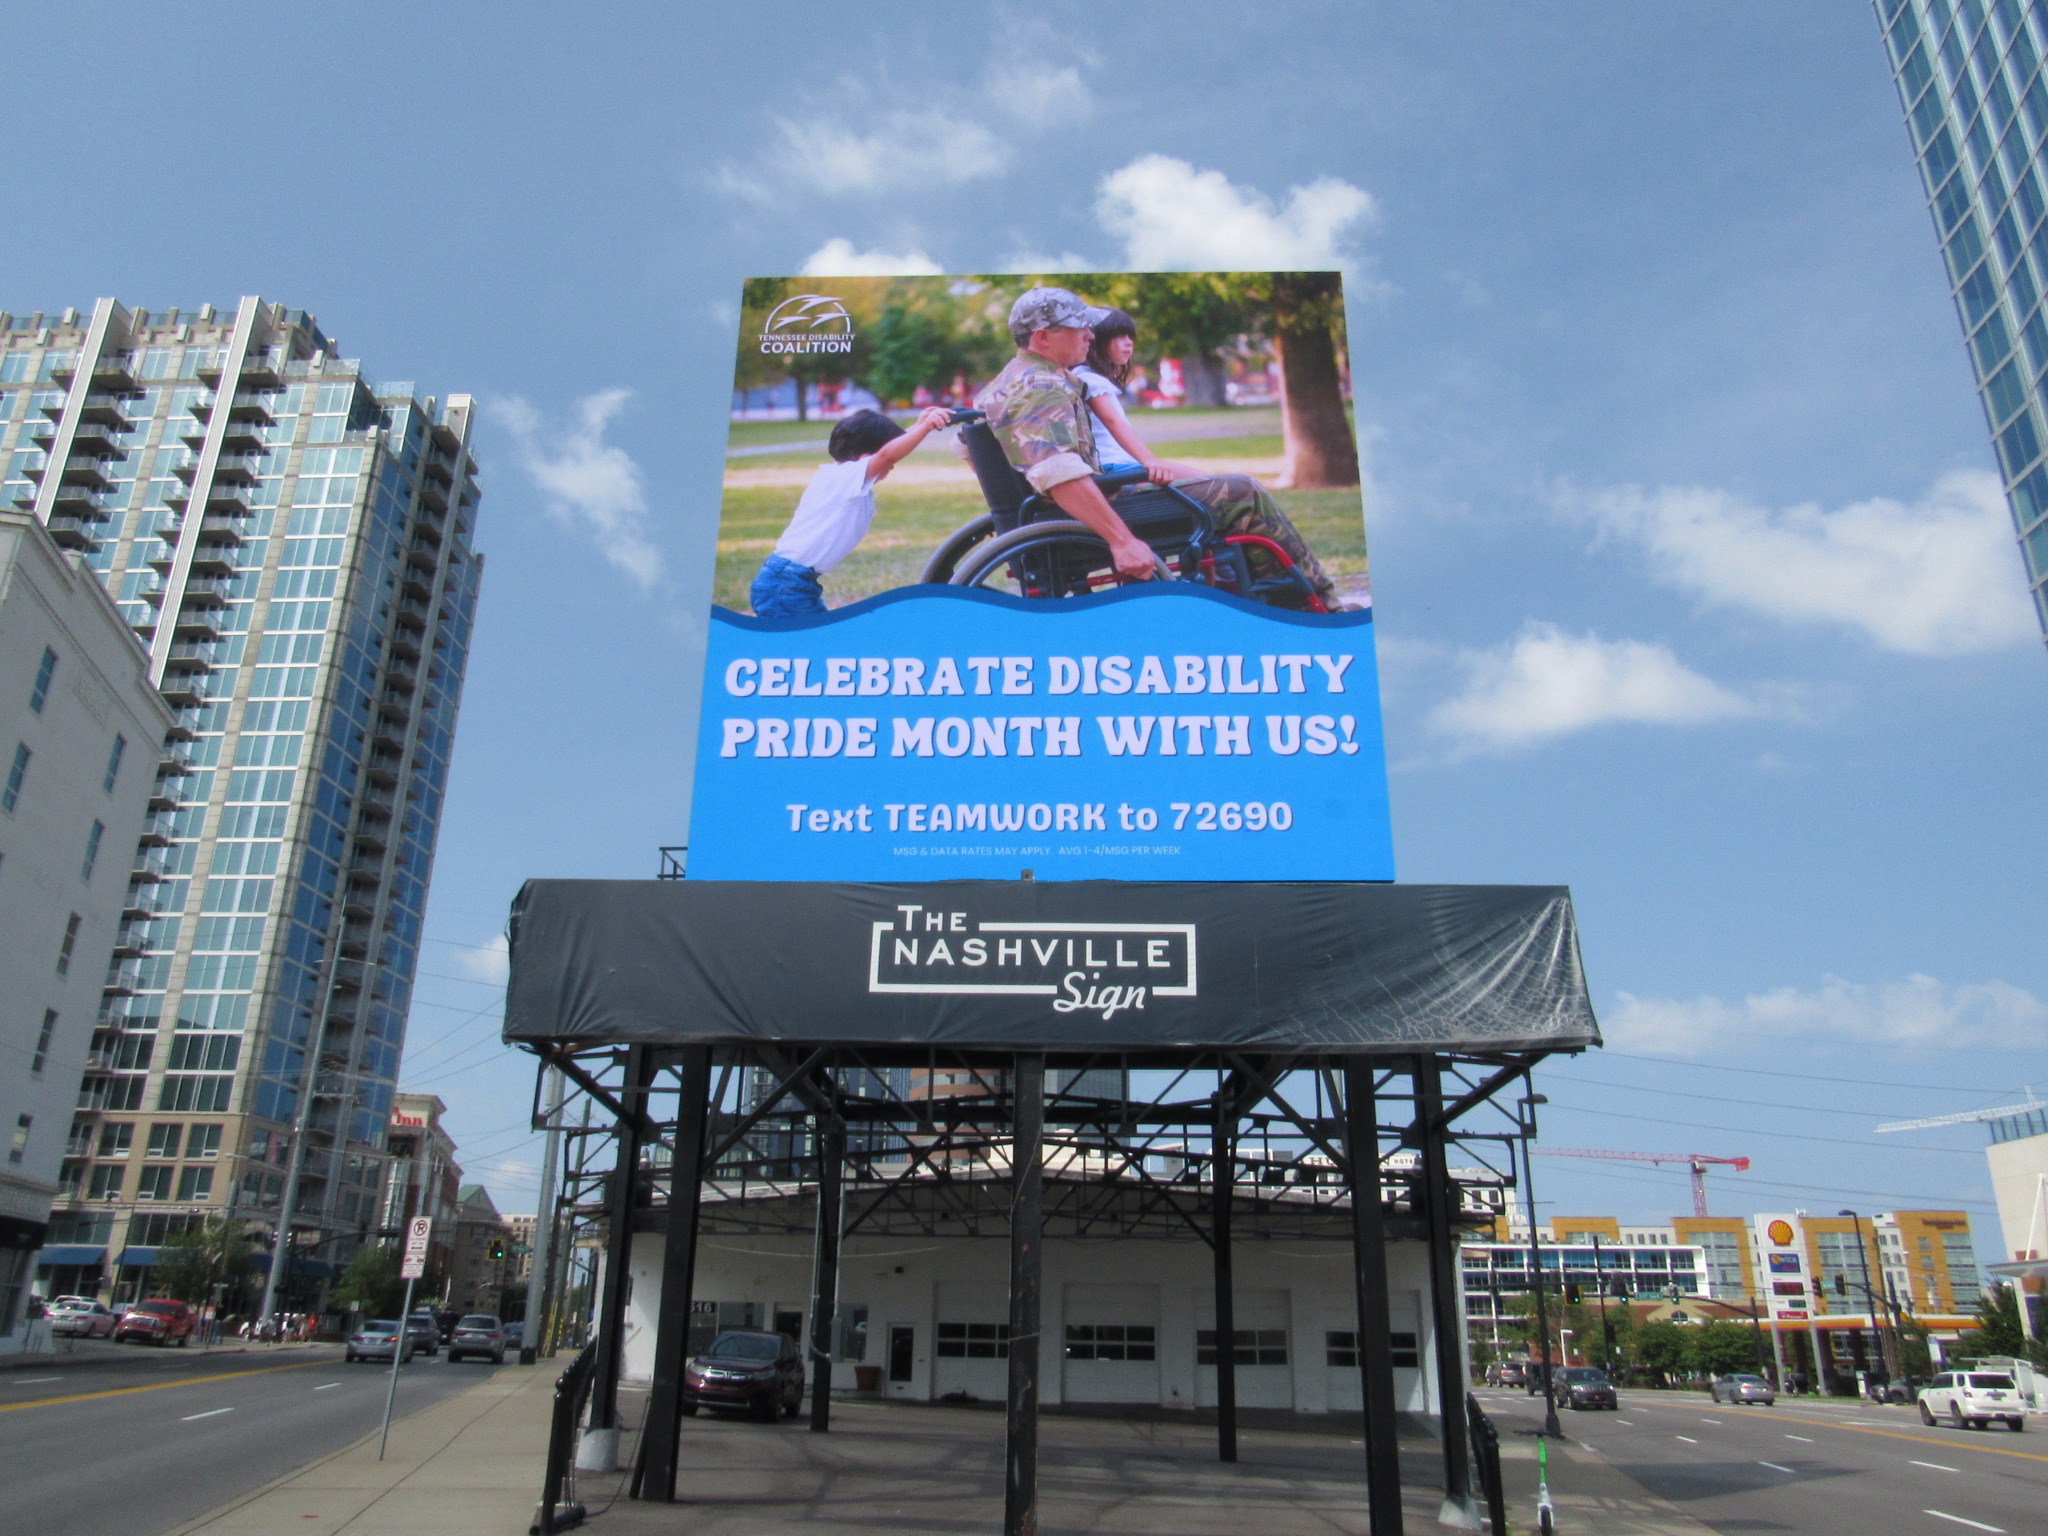 TDC's Disability Pride Month billboard displayed on a large billboard in downtown Nashville